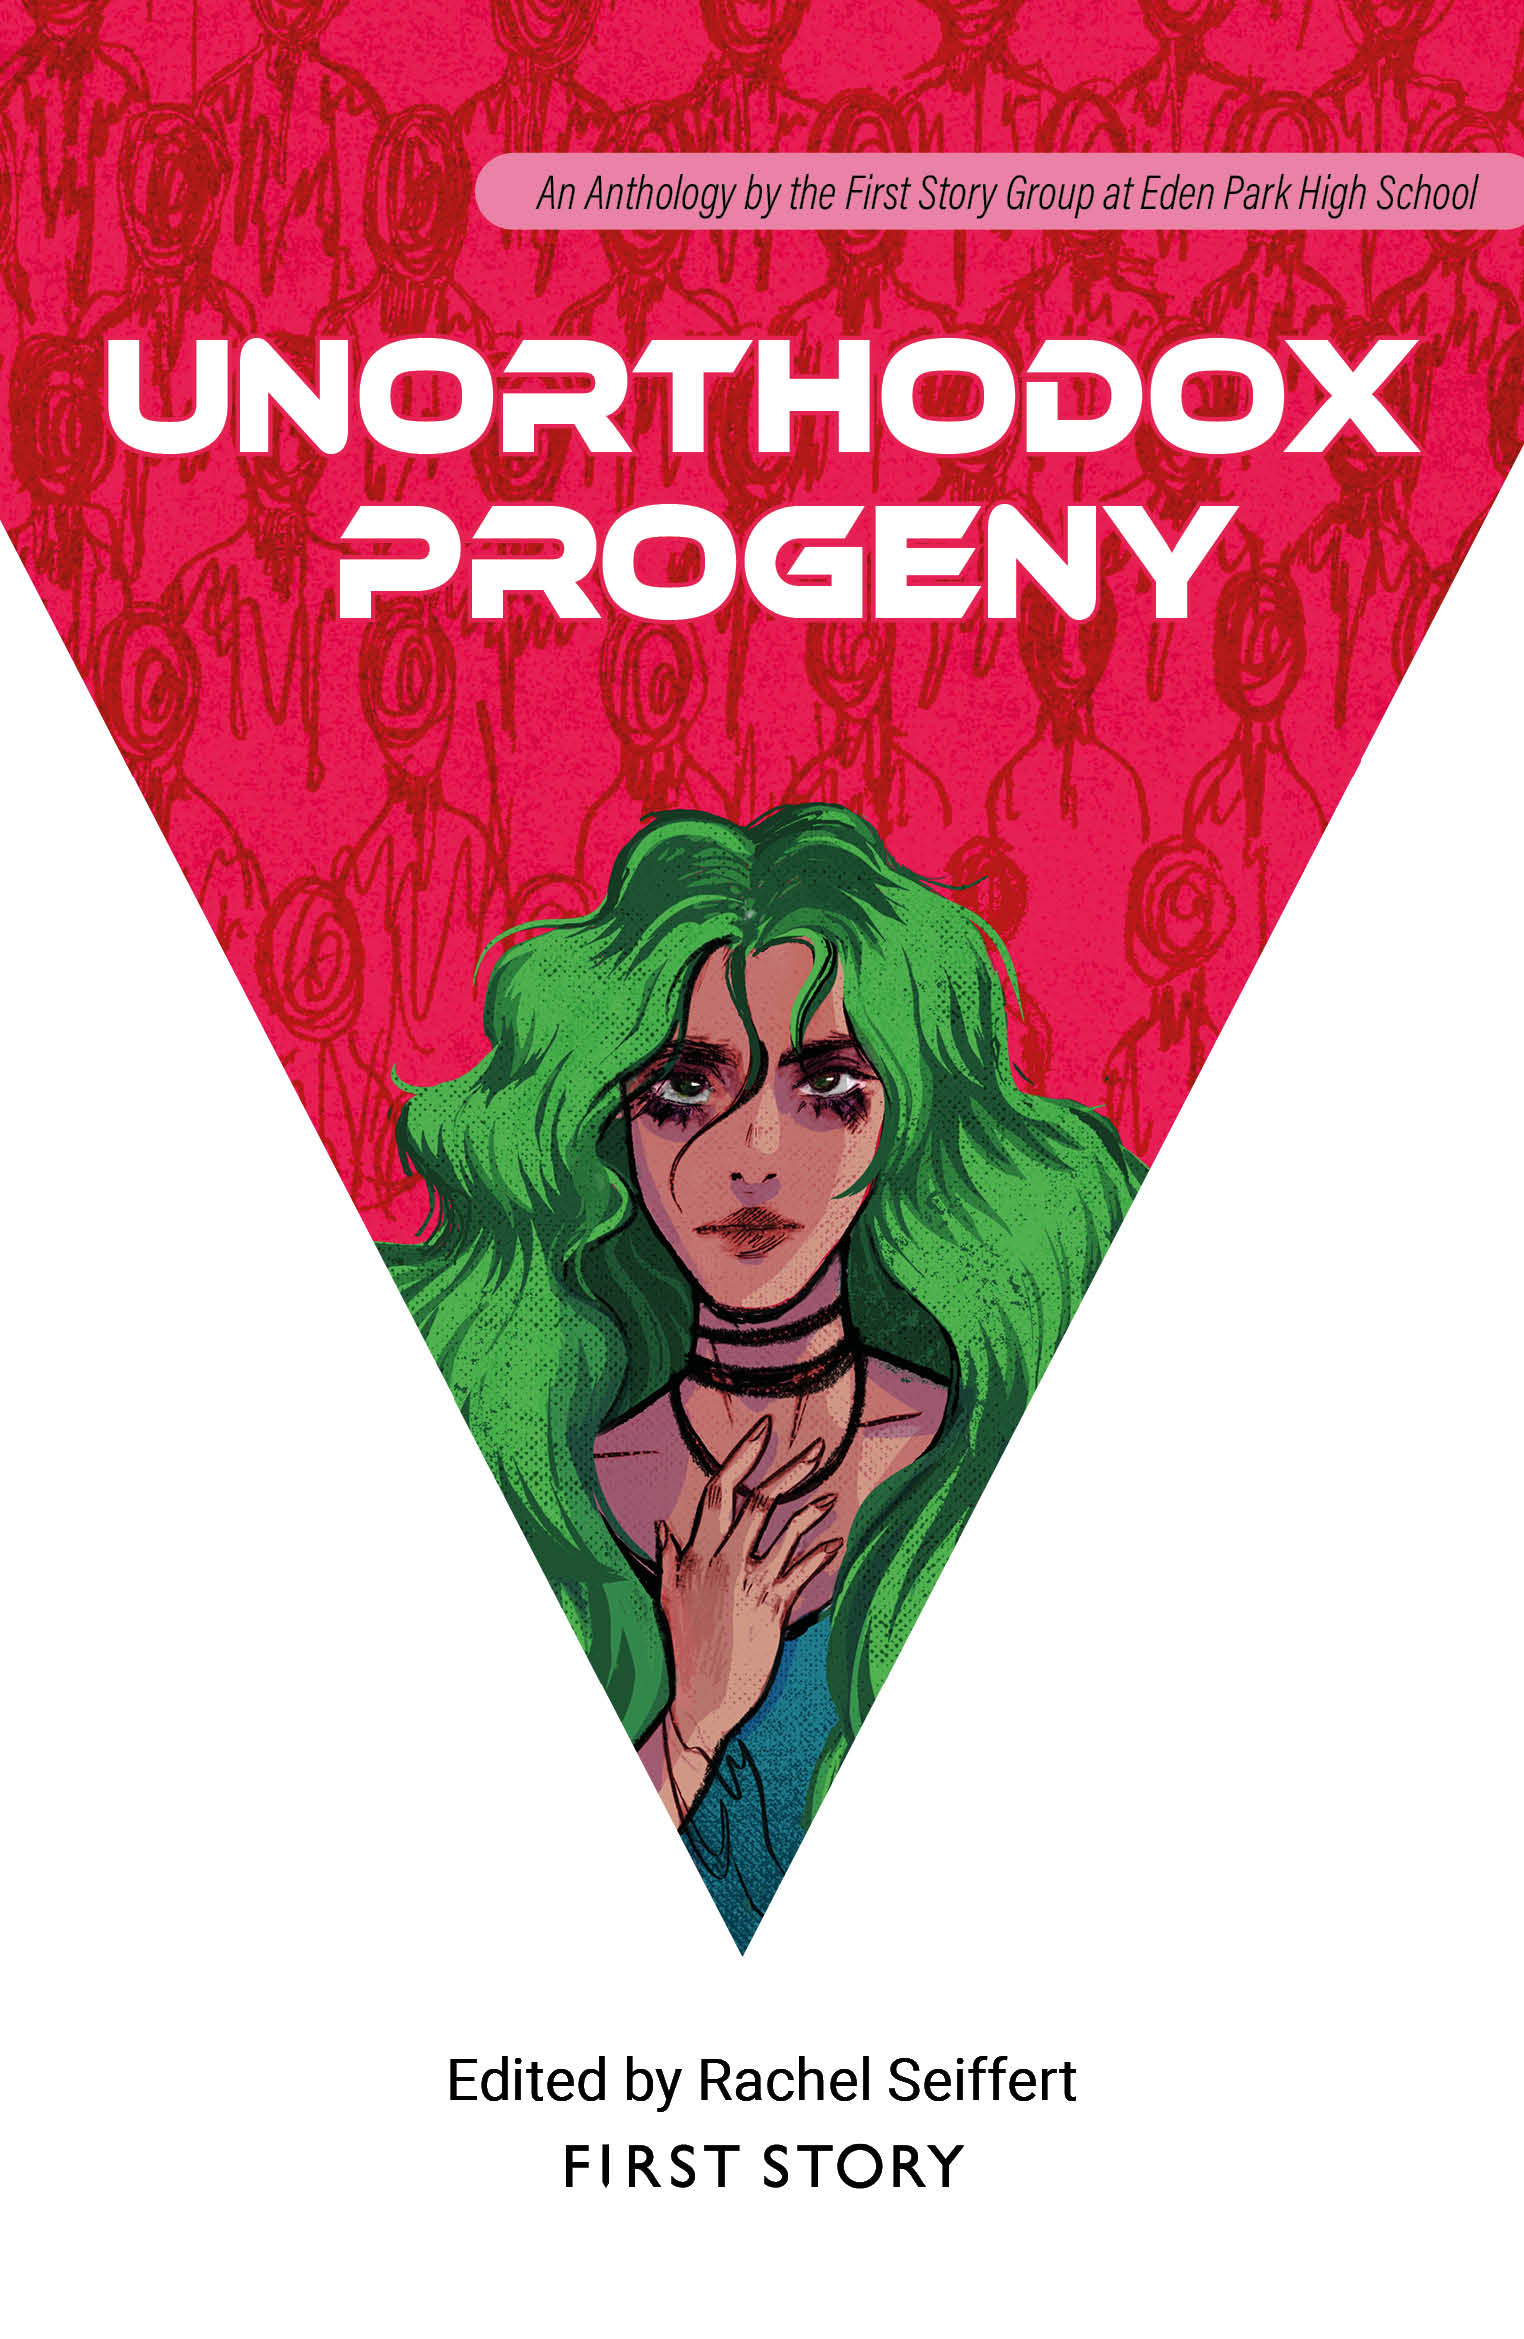 Cover of First Story Anthology for Eden Park School, titled Unorthodox Progeny